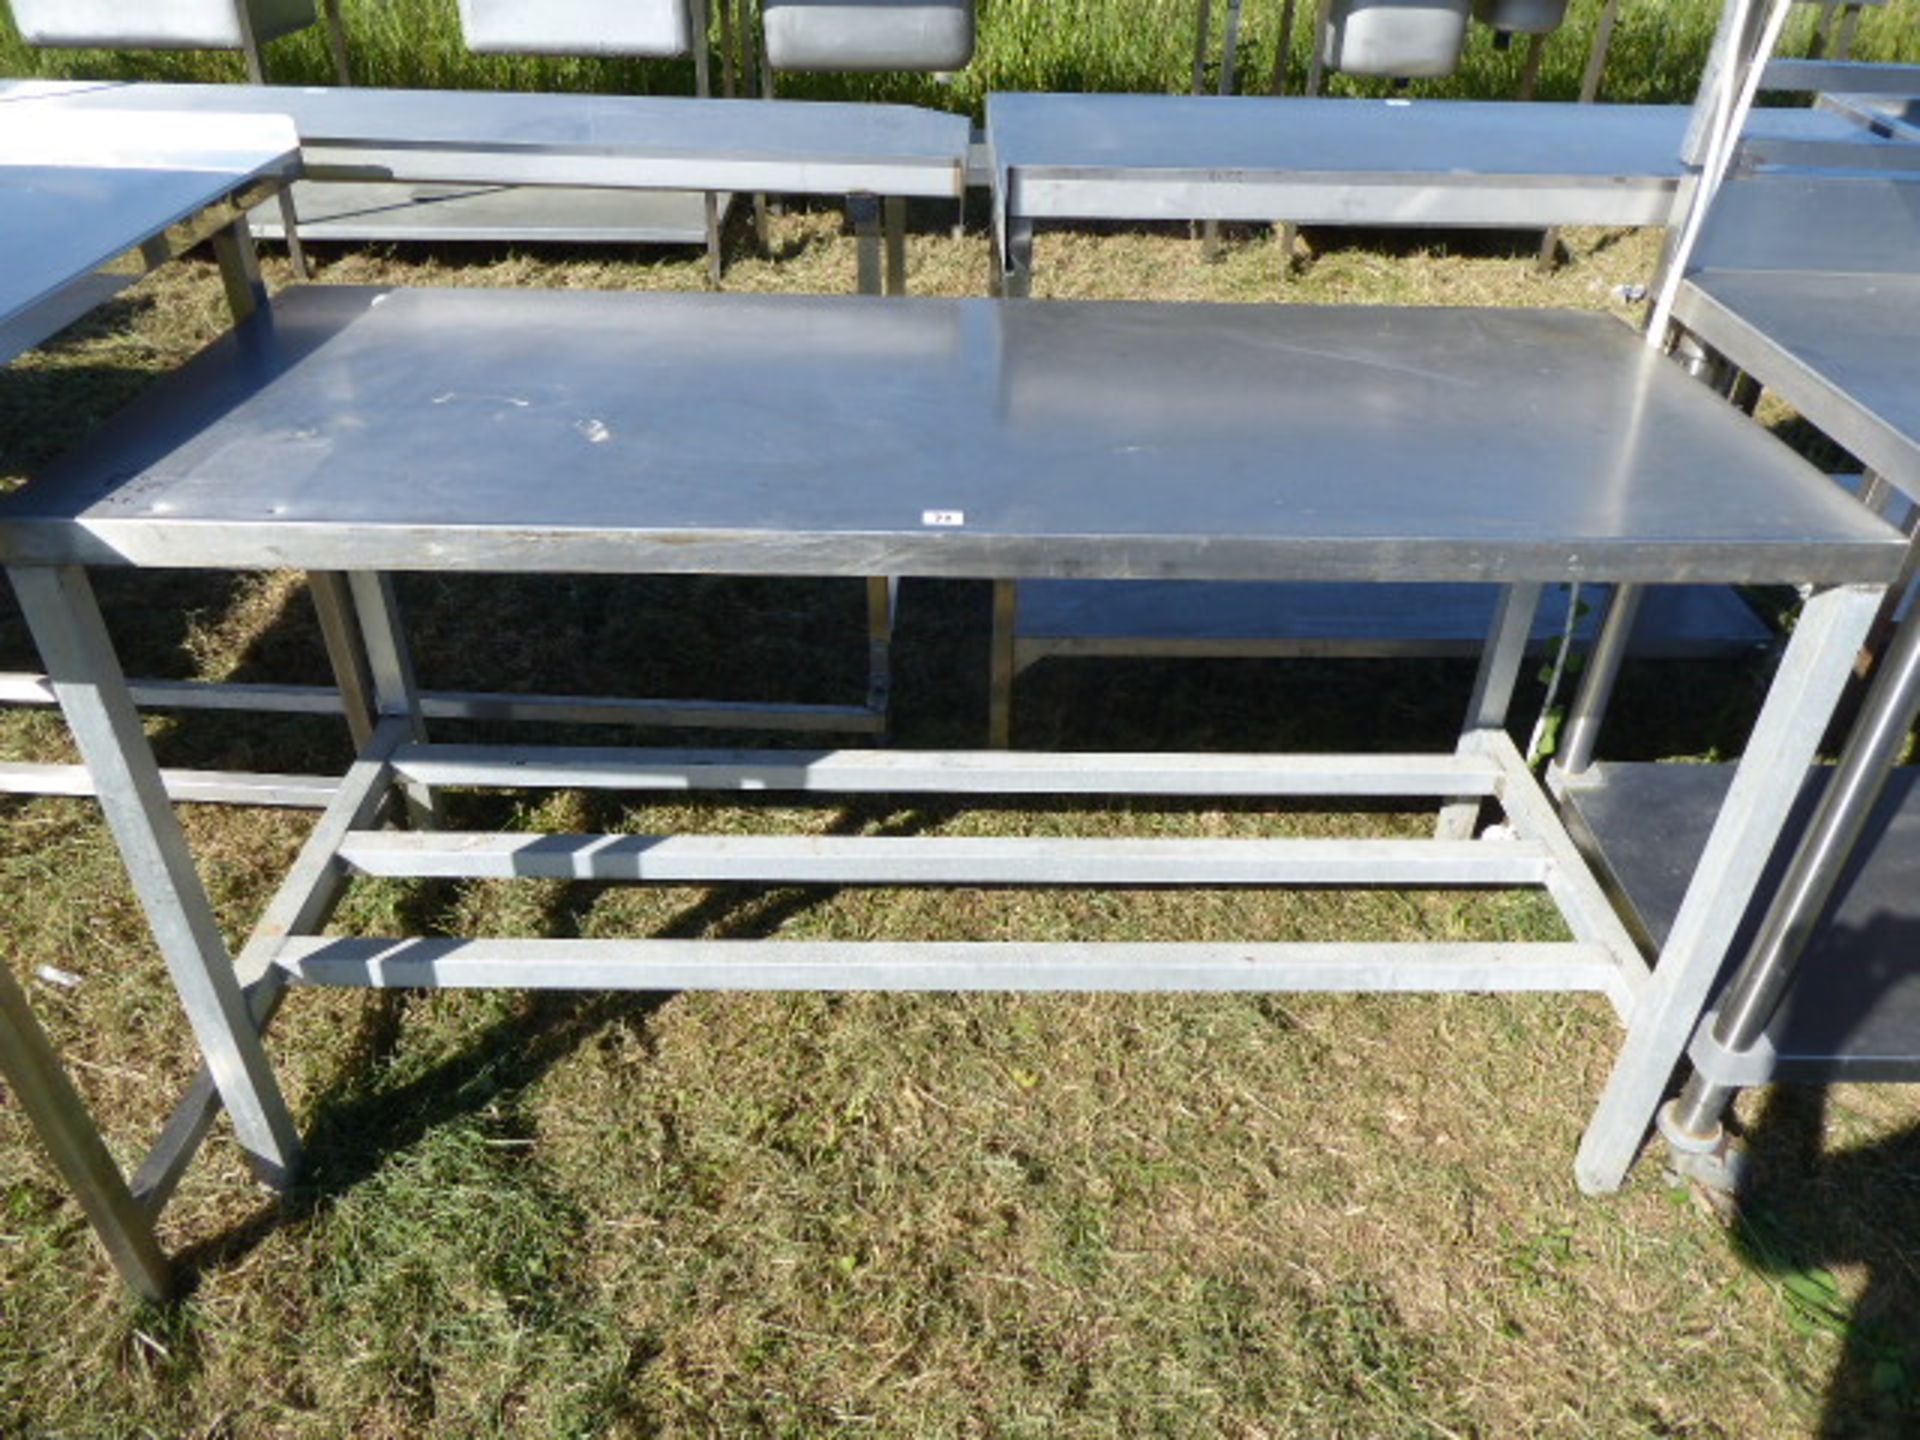 Stainless steel preparation table with a heavy duty frame, 1530mm wide, 610mm deep and 830mm high